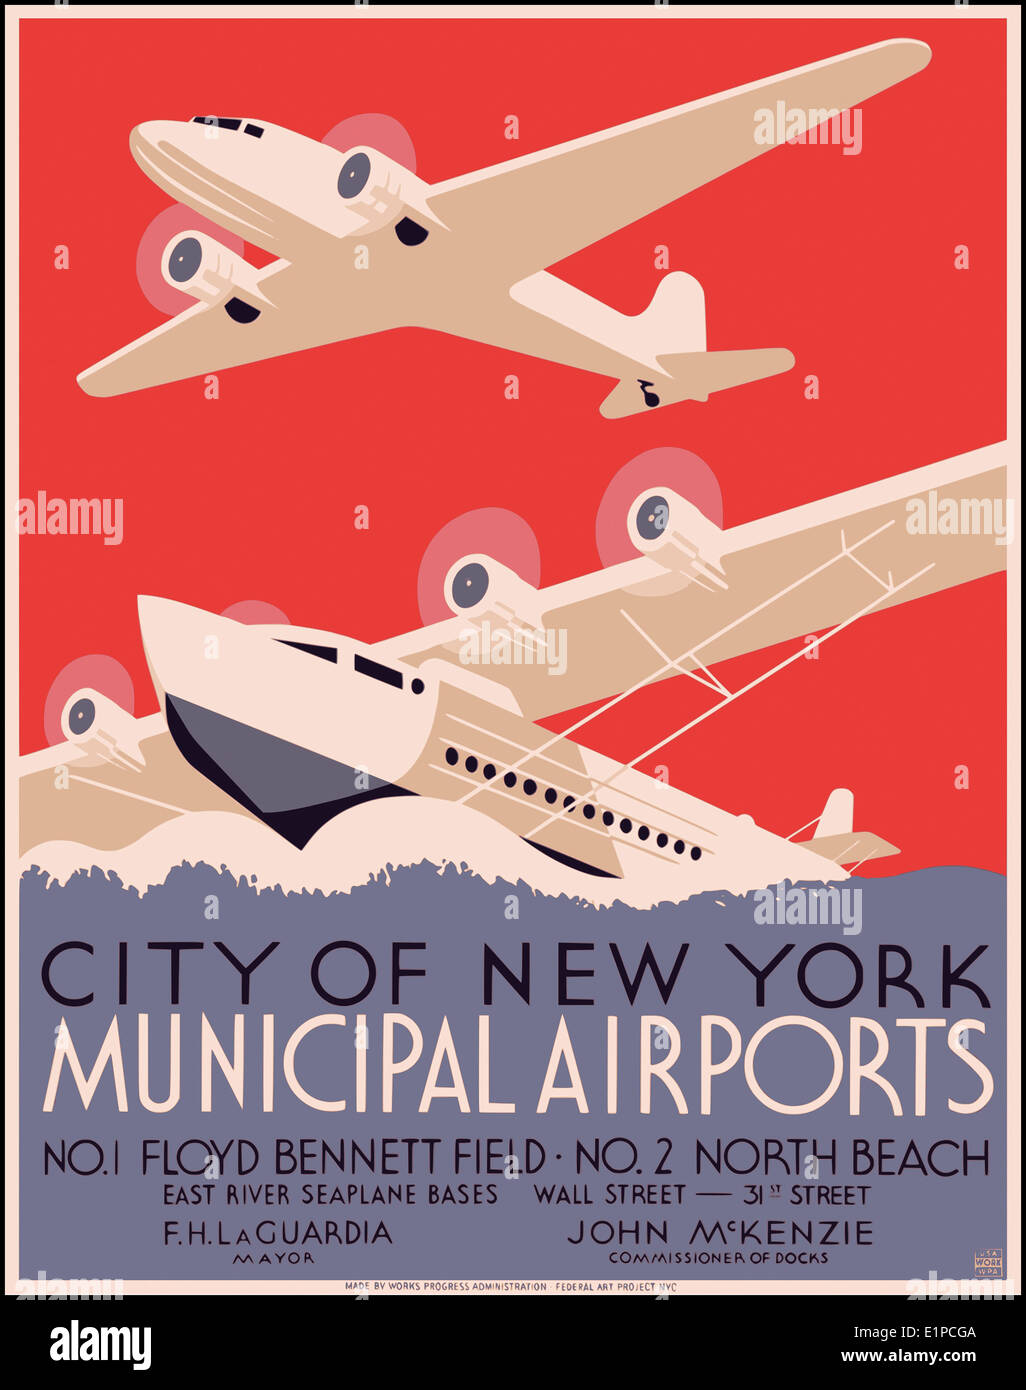 1920's vintage poster featuring flying to municipal airports in New York City Stock Photo